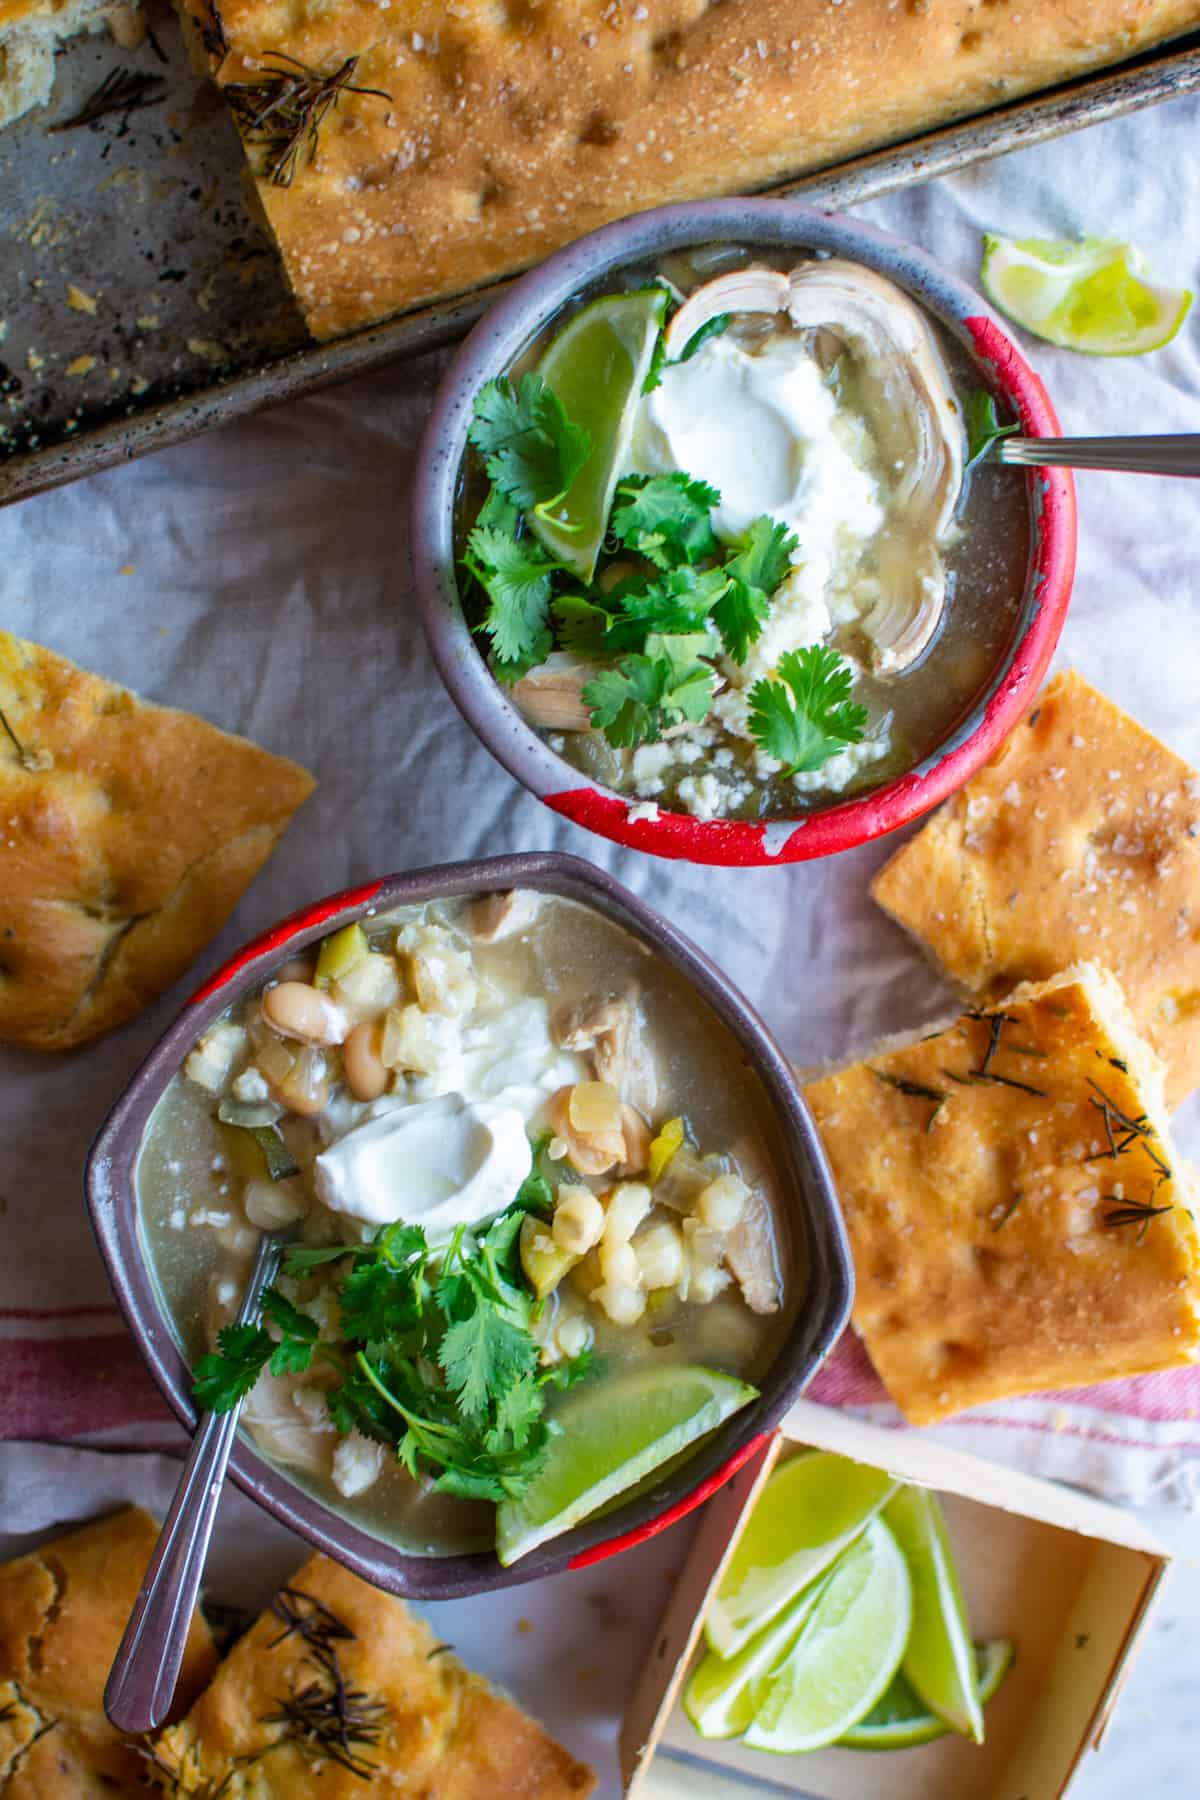 Two bowls of chicken chili on a table covered in a white tablecloth with several pieces of focaccia around it.